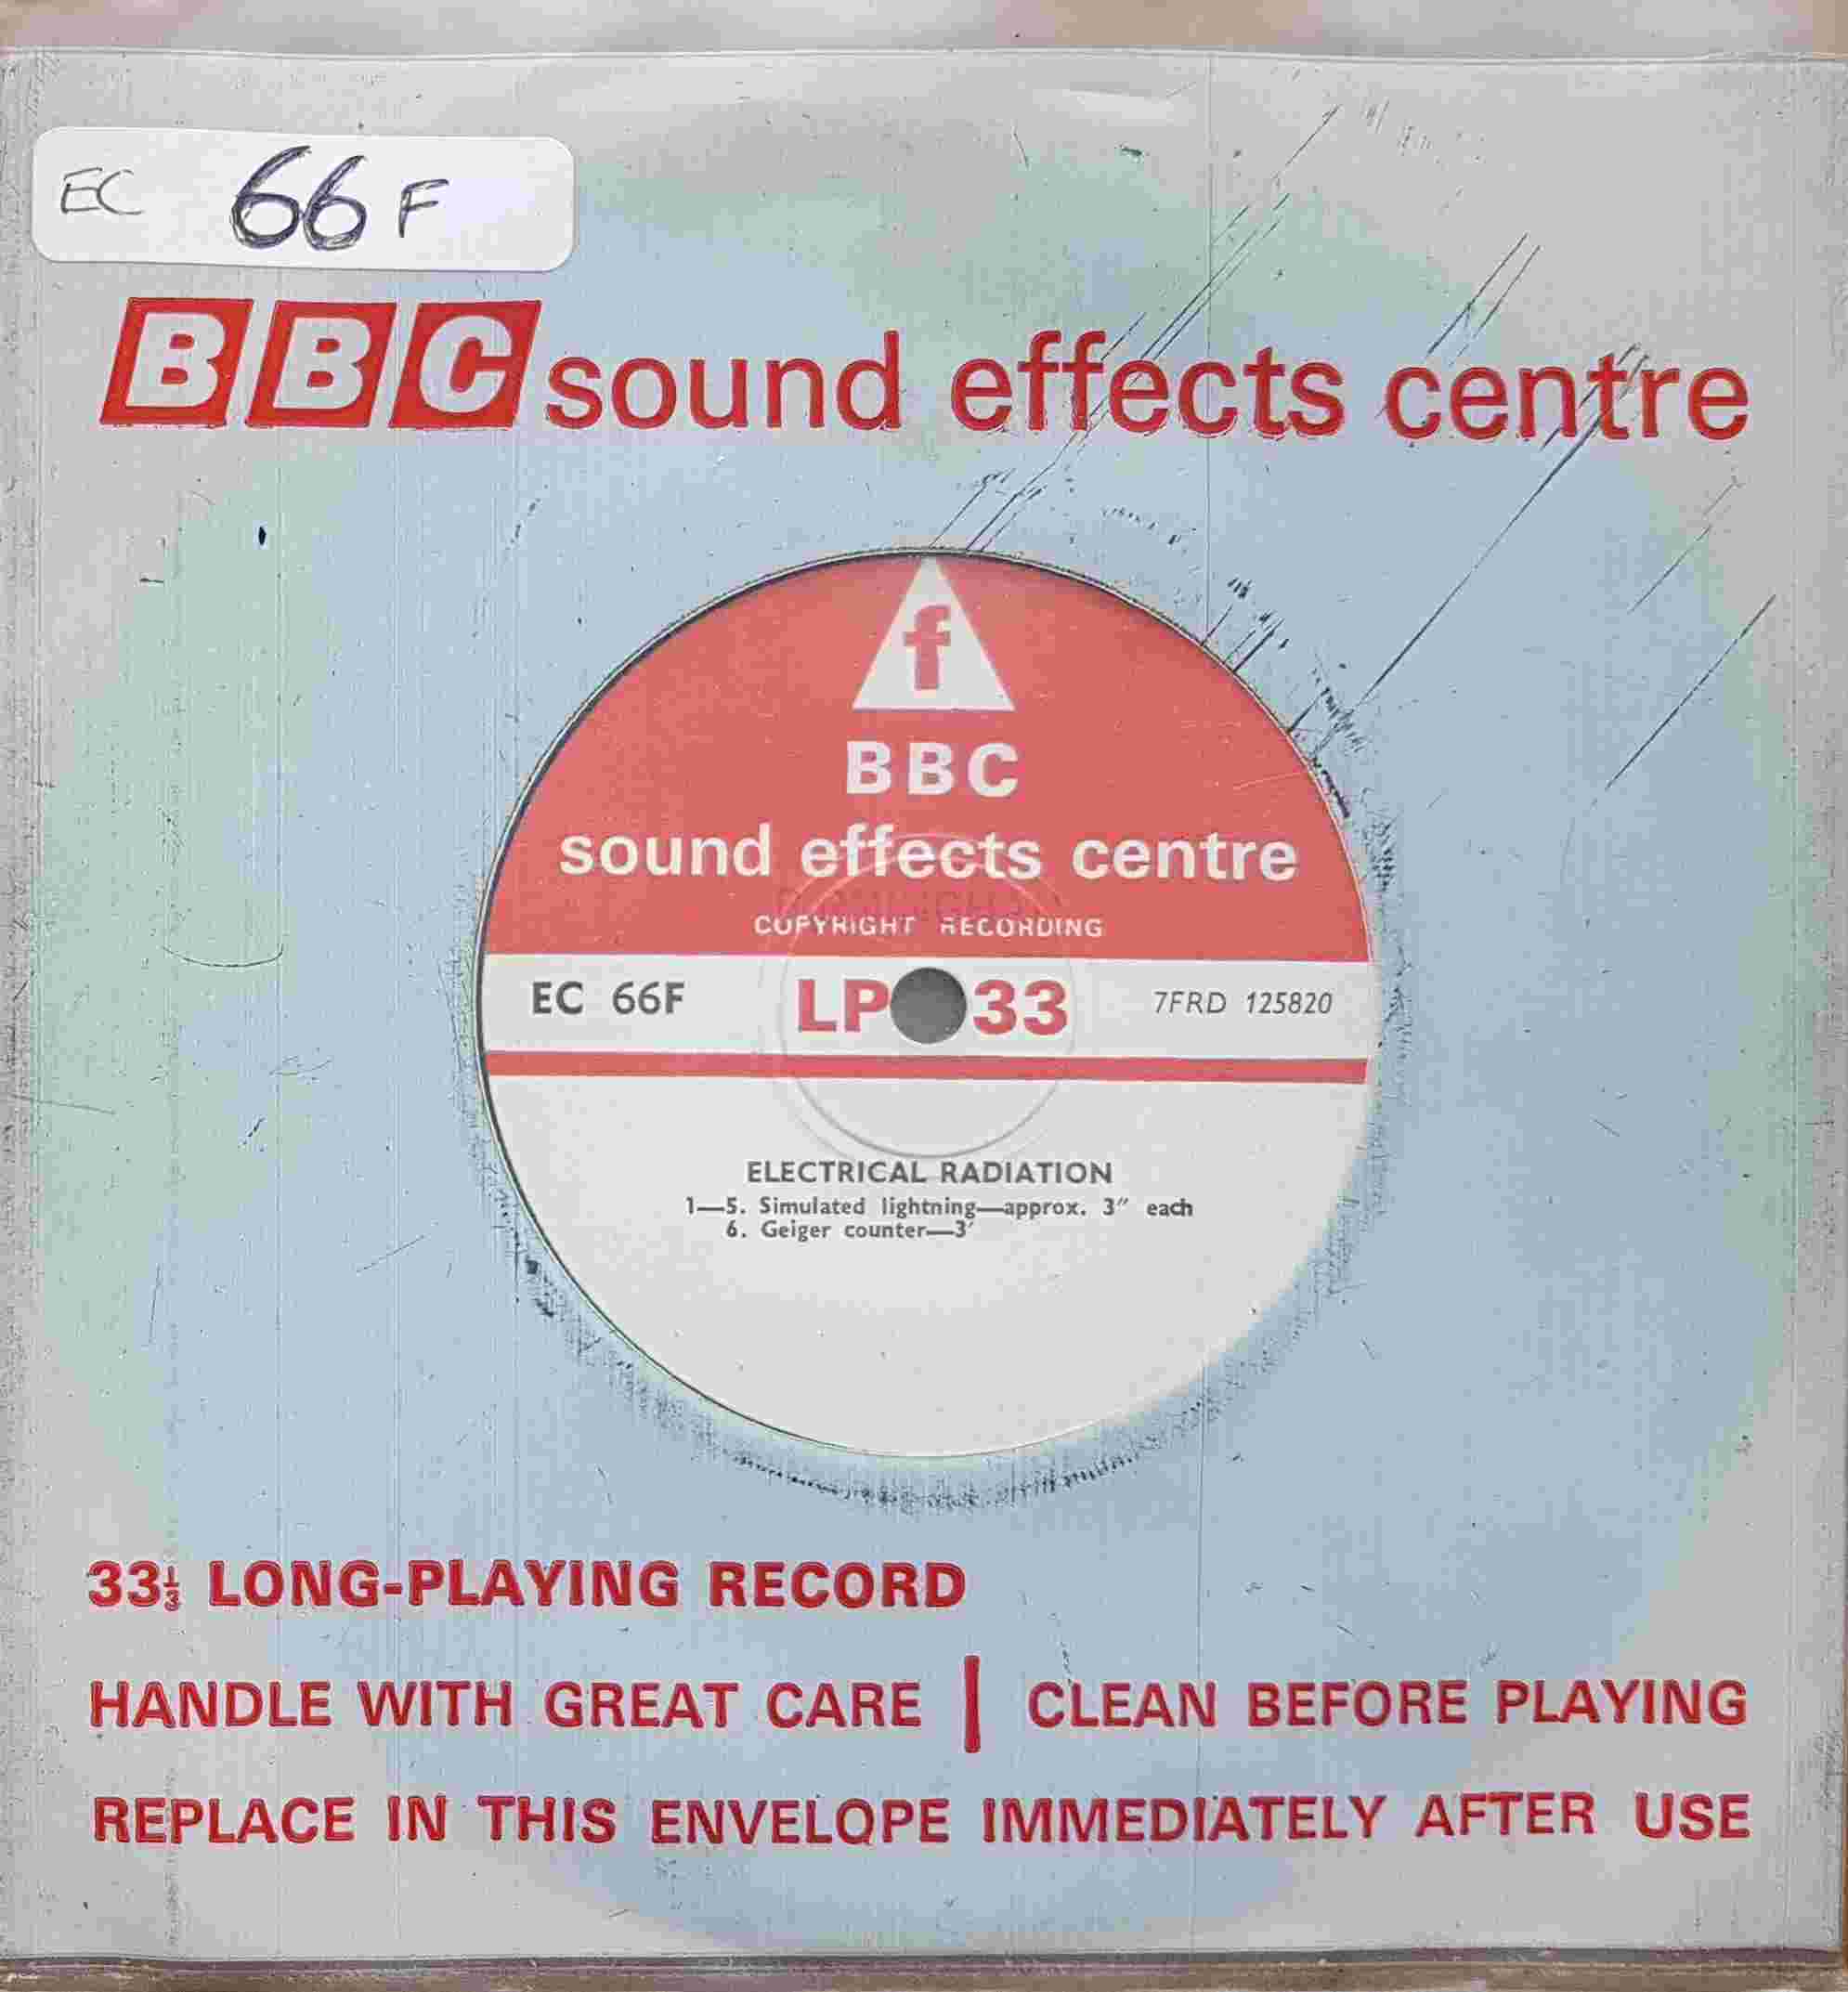 Picture of EC 66F Electrical radiation by artist Not registered from the BBC records and Tapes library